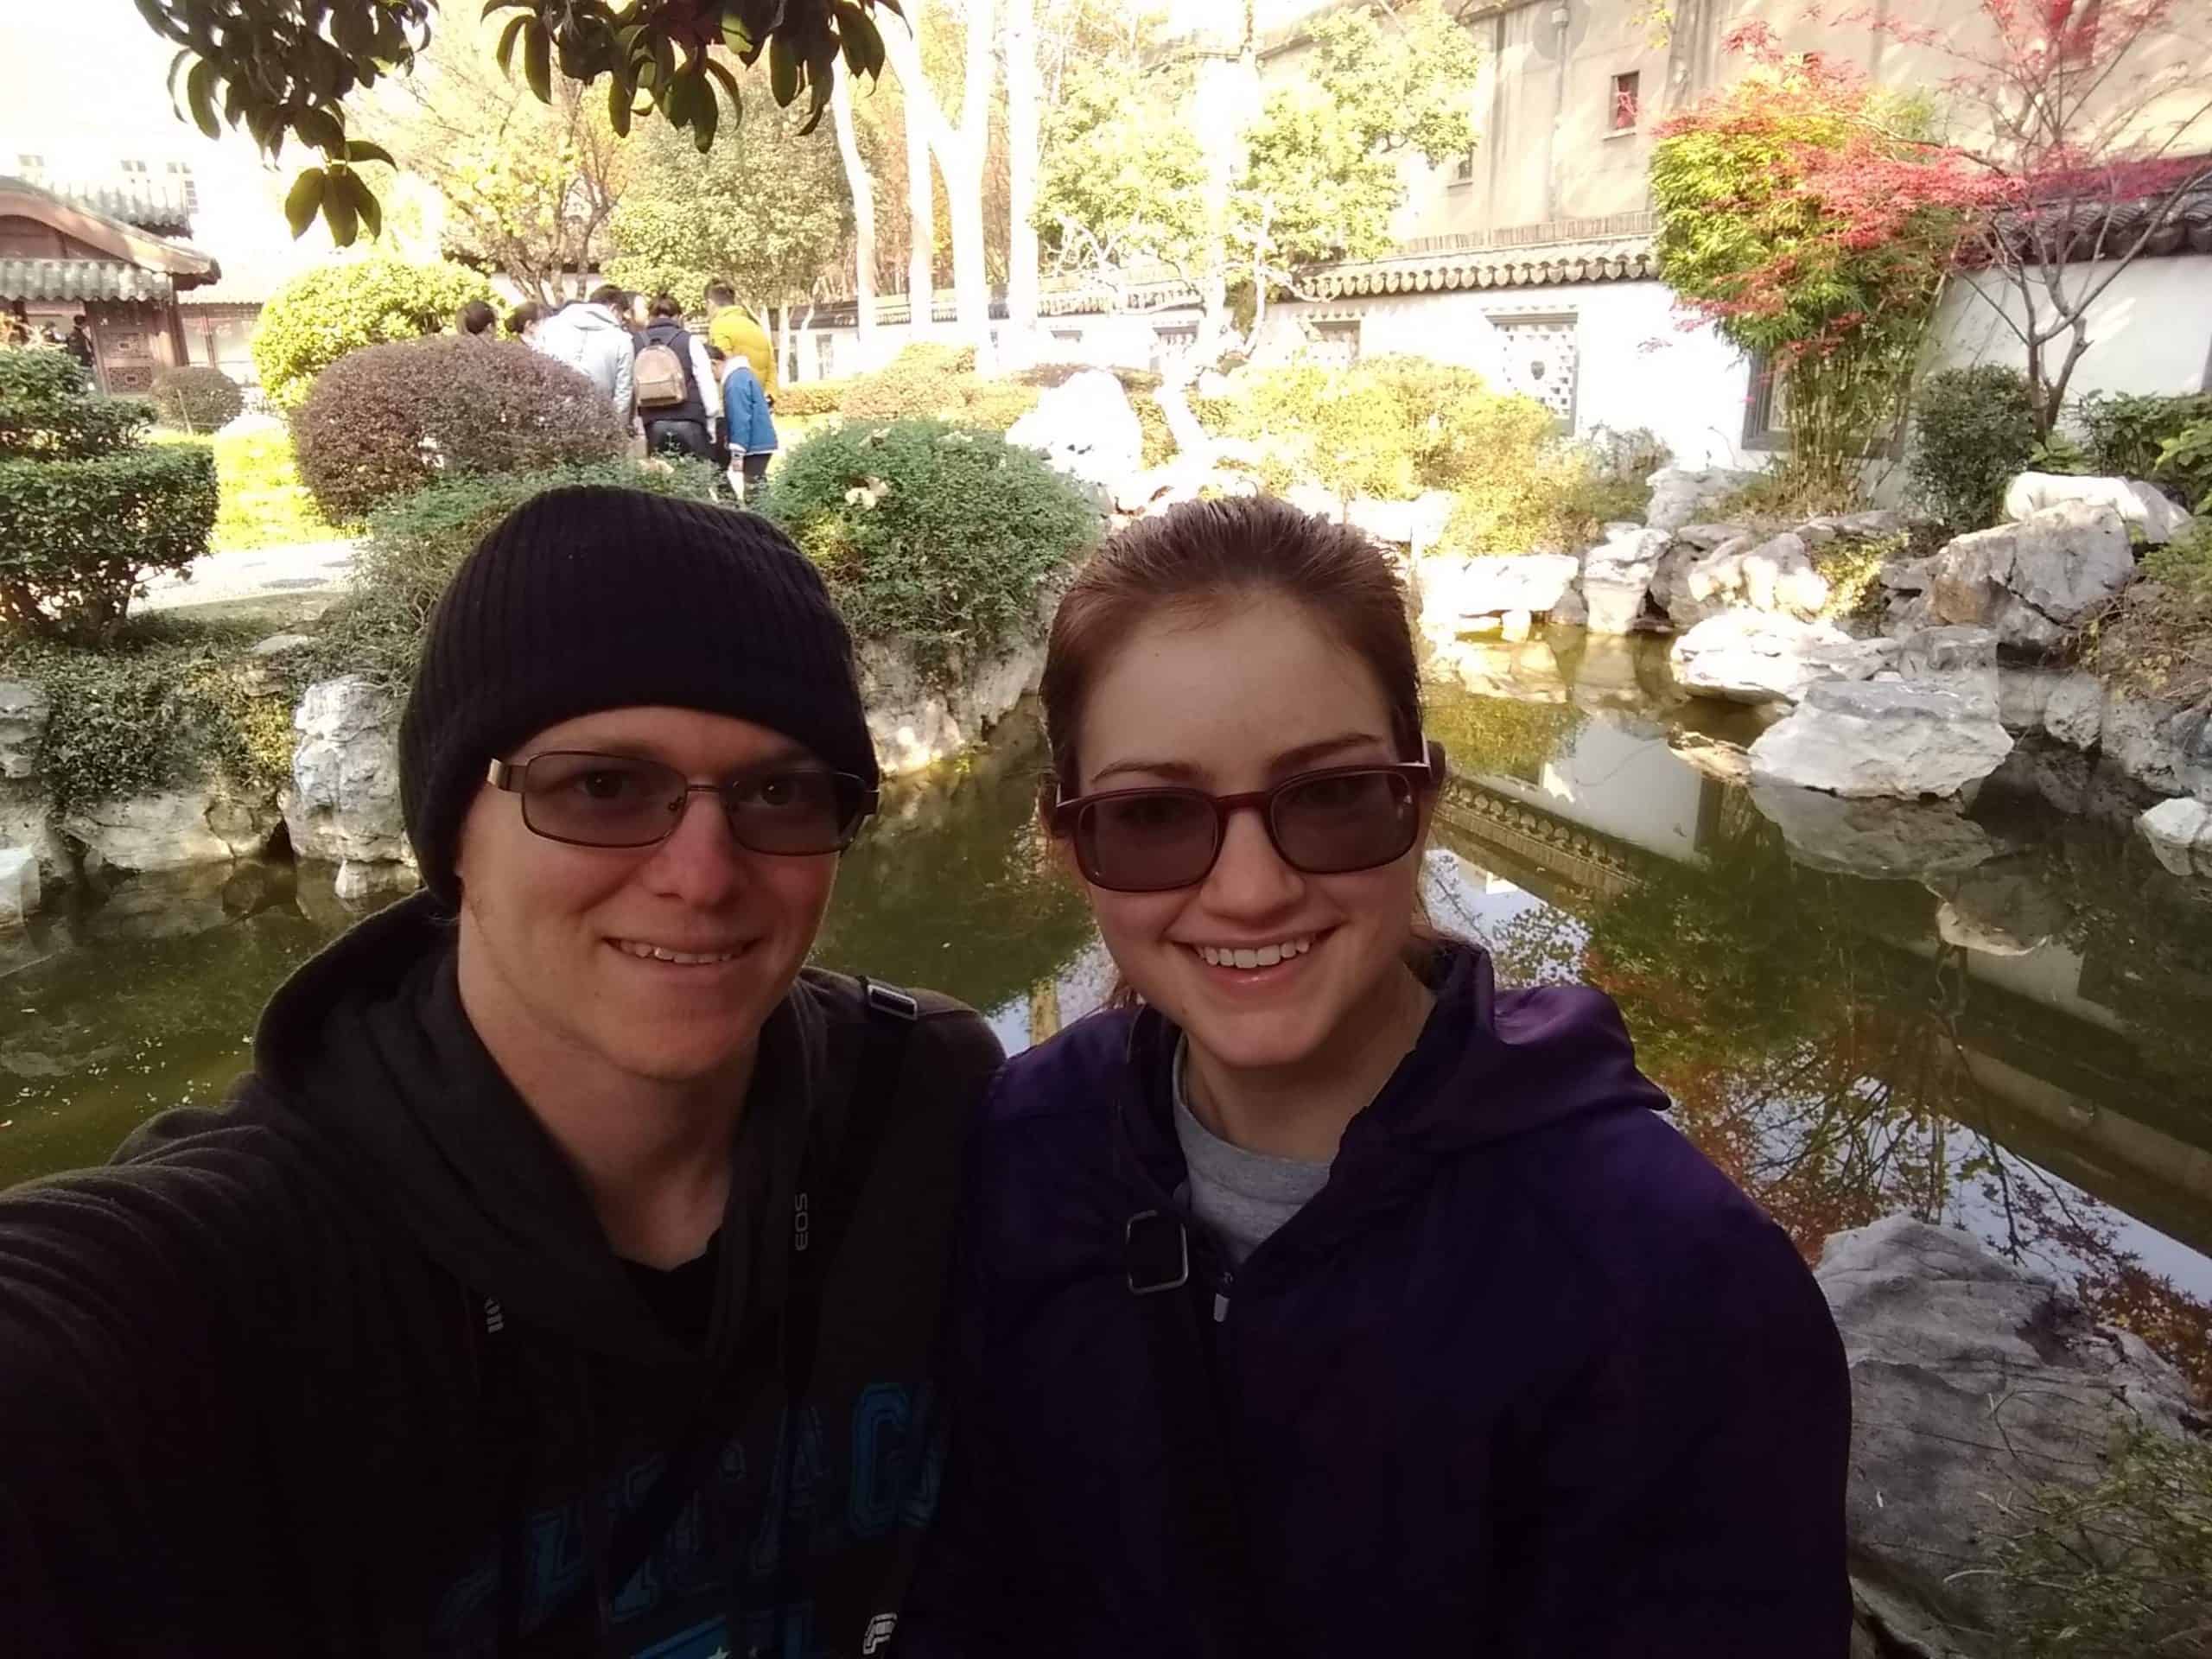 Derek and Kacie at the Presidential Palace in Nanjing, China